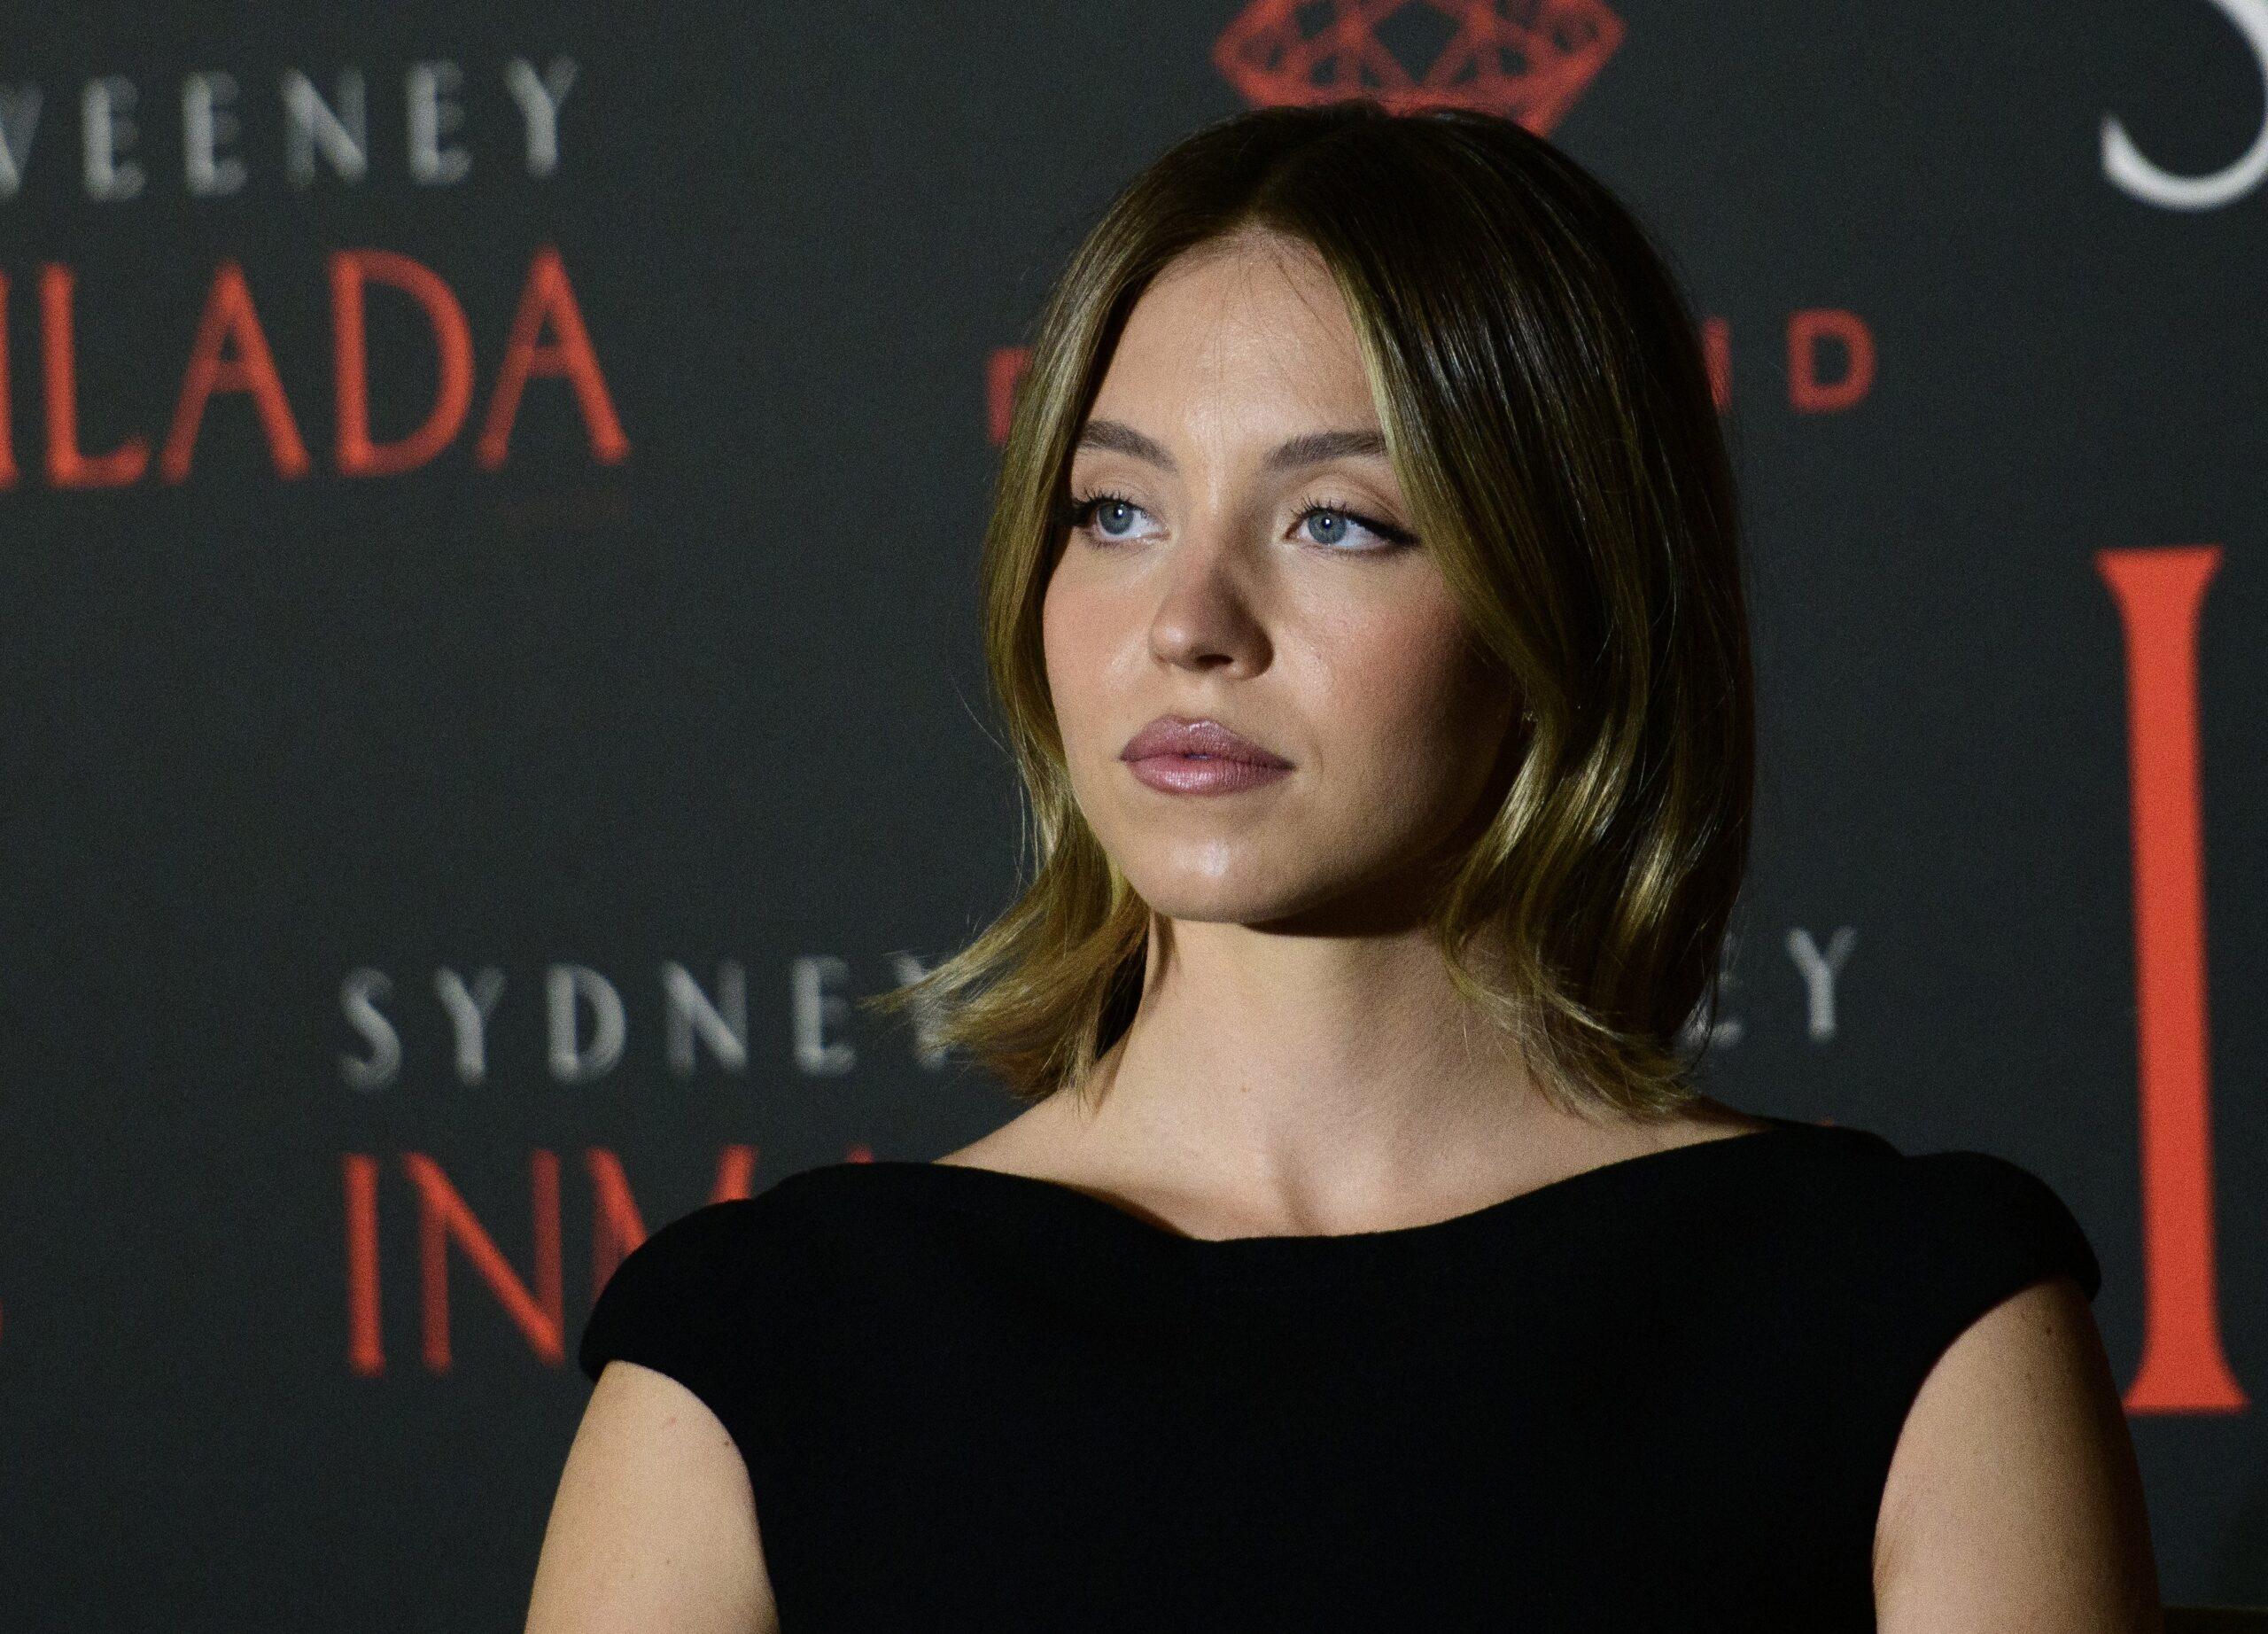 Sydney Sweeney presents in Mexico: Inmaculate